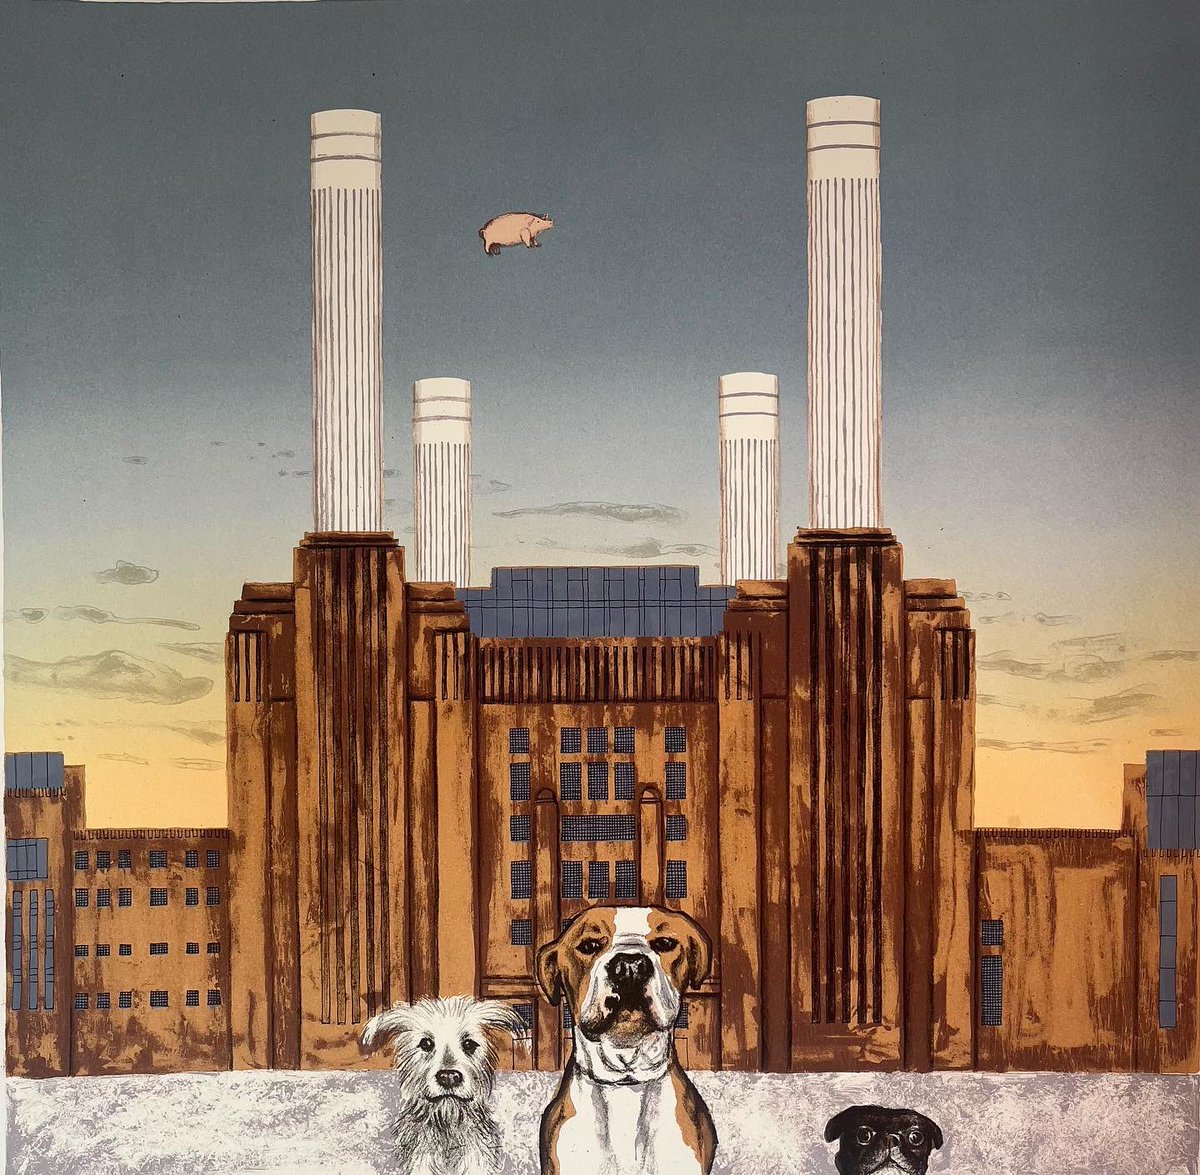 Wes Anderson’s dog - Battersea Power Station screenprint is currently on display with @EamesFineArt at the @WoolwichCPF #woolwichcontemporaryprintfair